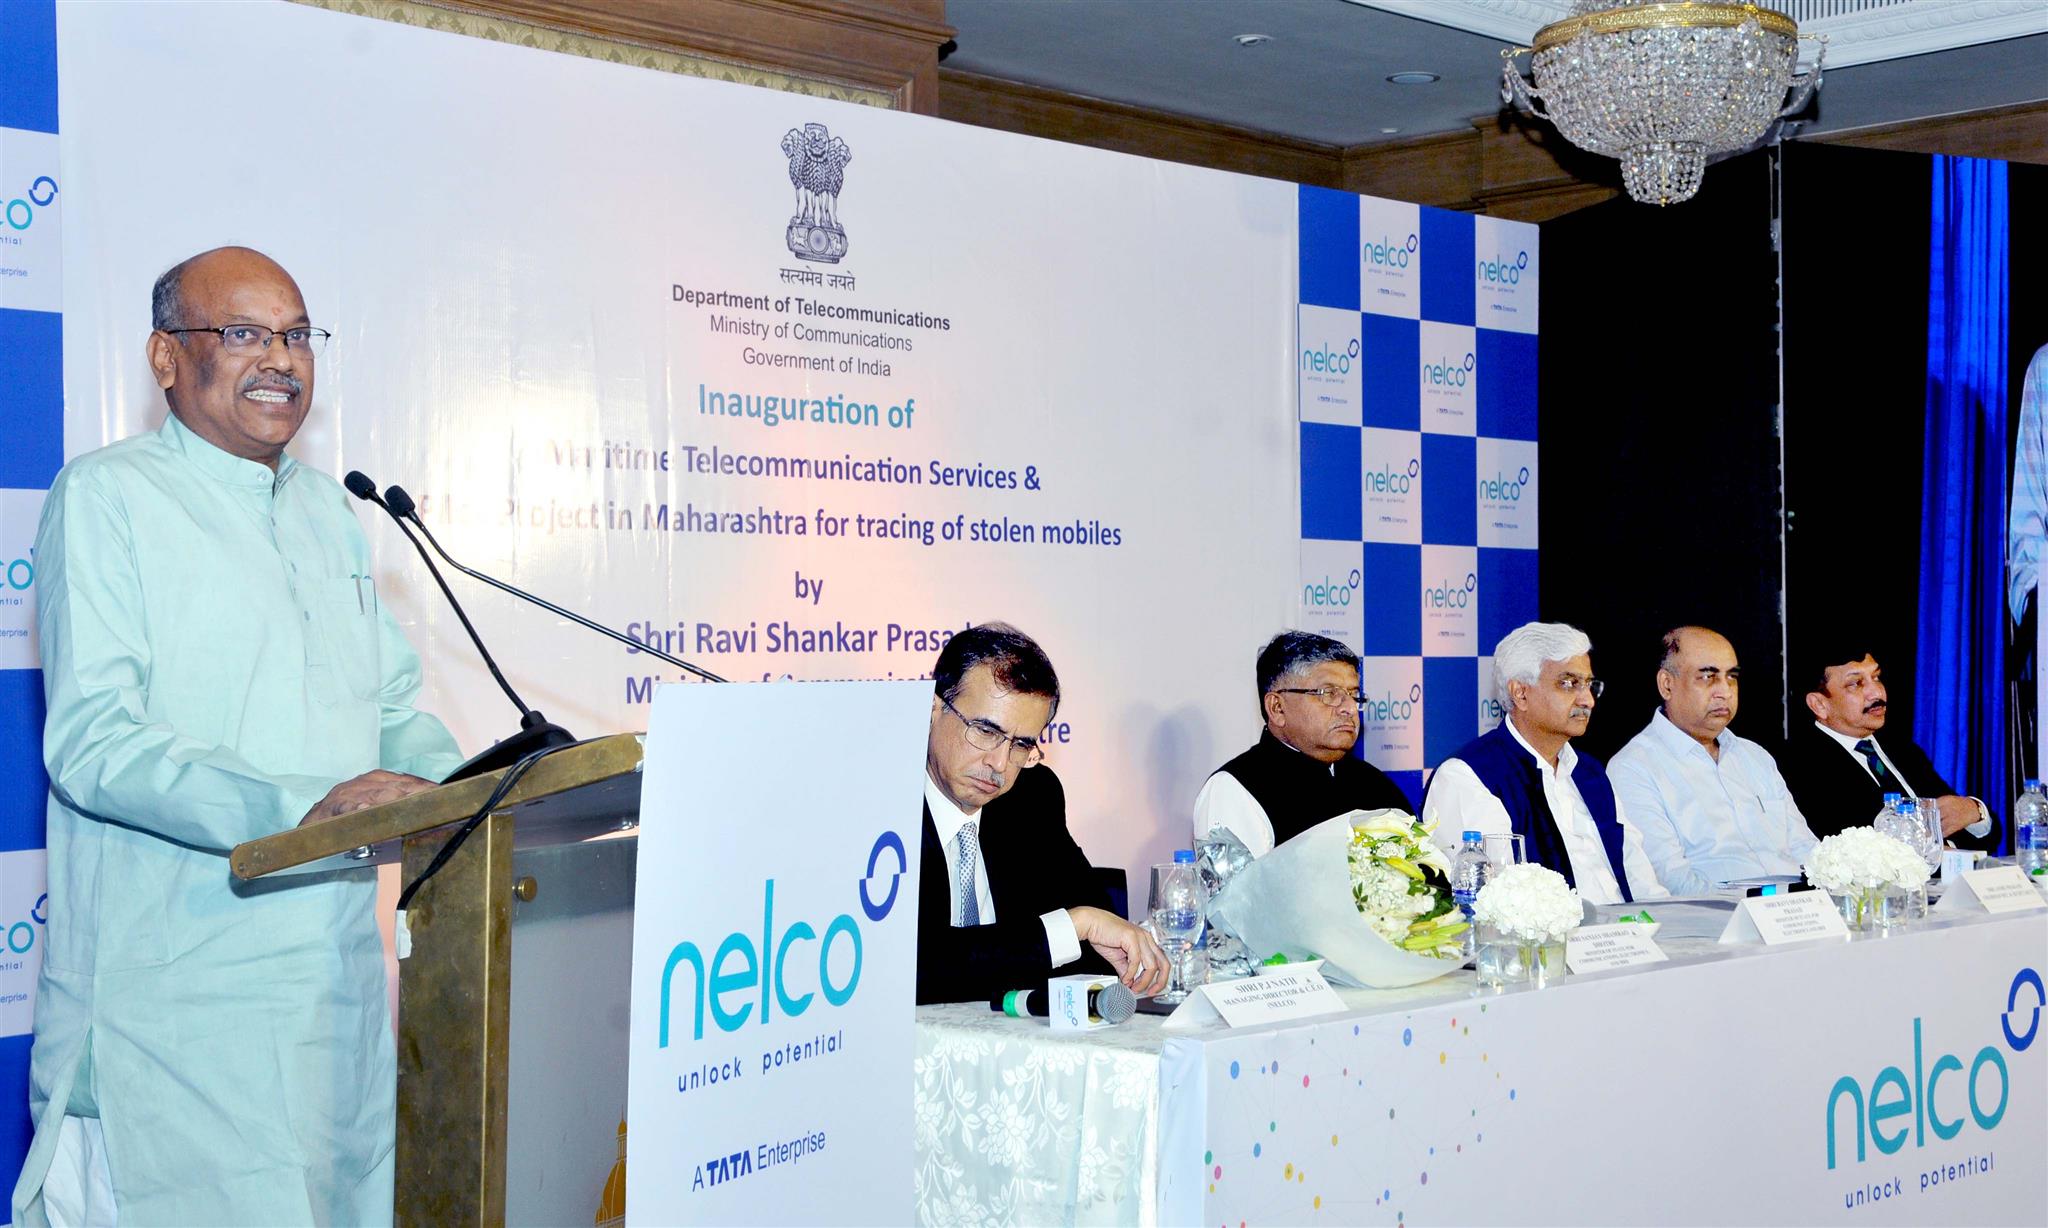 MoS for Communication Shri Sanjay Shamrao Dhotre addressing at inauguration of Maritime Telecommunication Service & Pilot Project in Maharashtra for Tracing stolen mobiles in Mumbai on September 13, 2019.